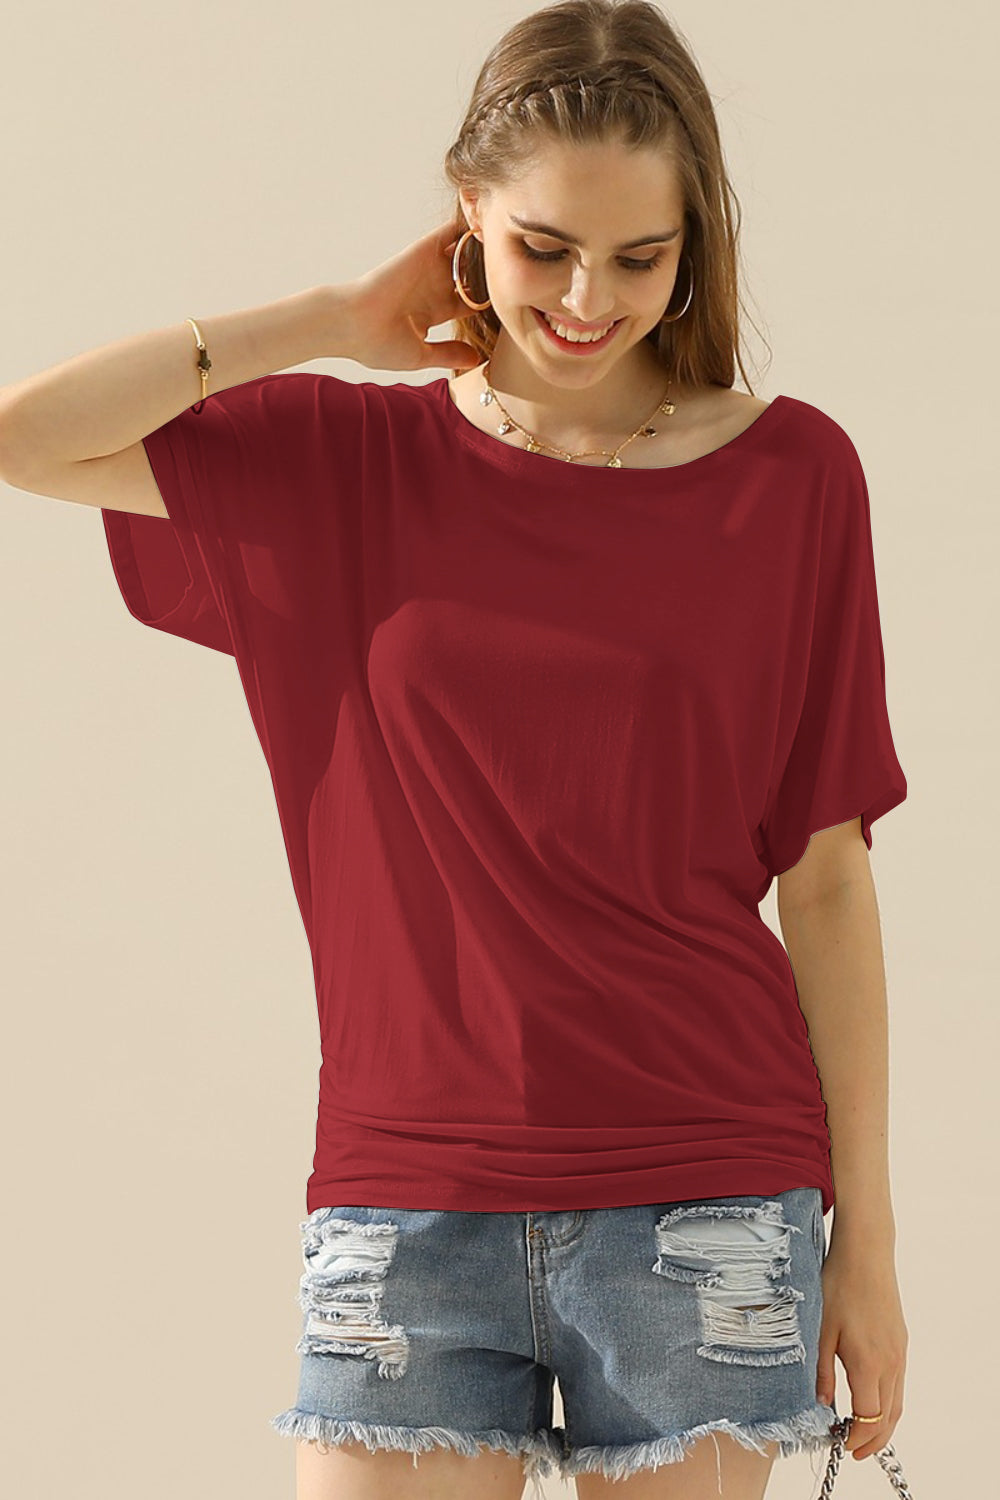 Ninexis Boat Neck Short Sleeve Ruched Side Top - BURGUNDY / S - TOPS - Mixed